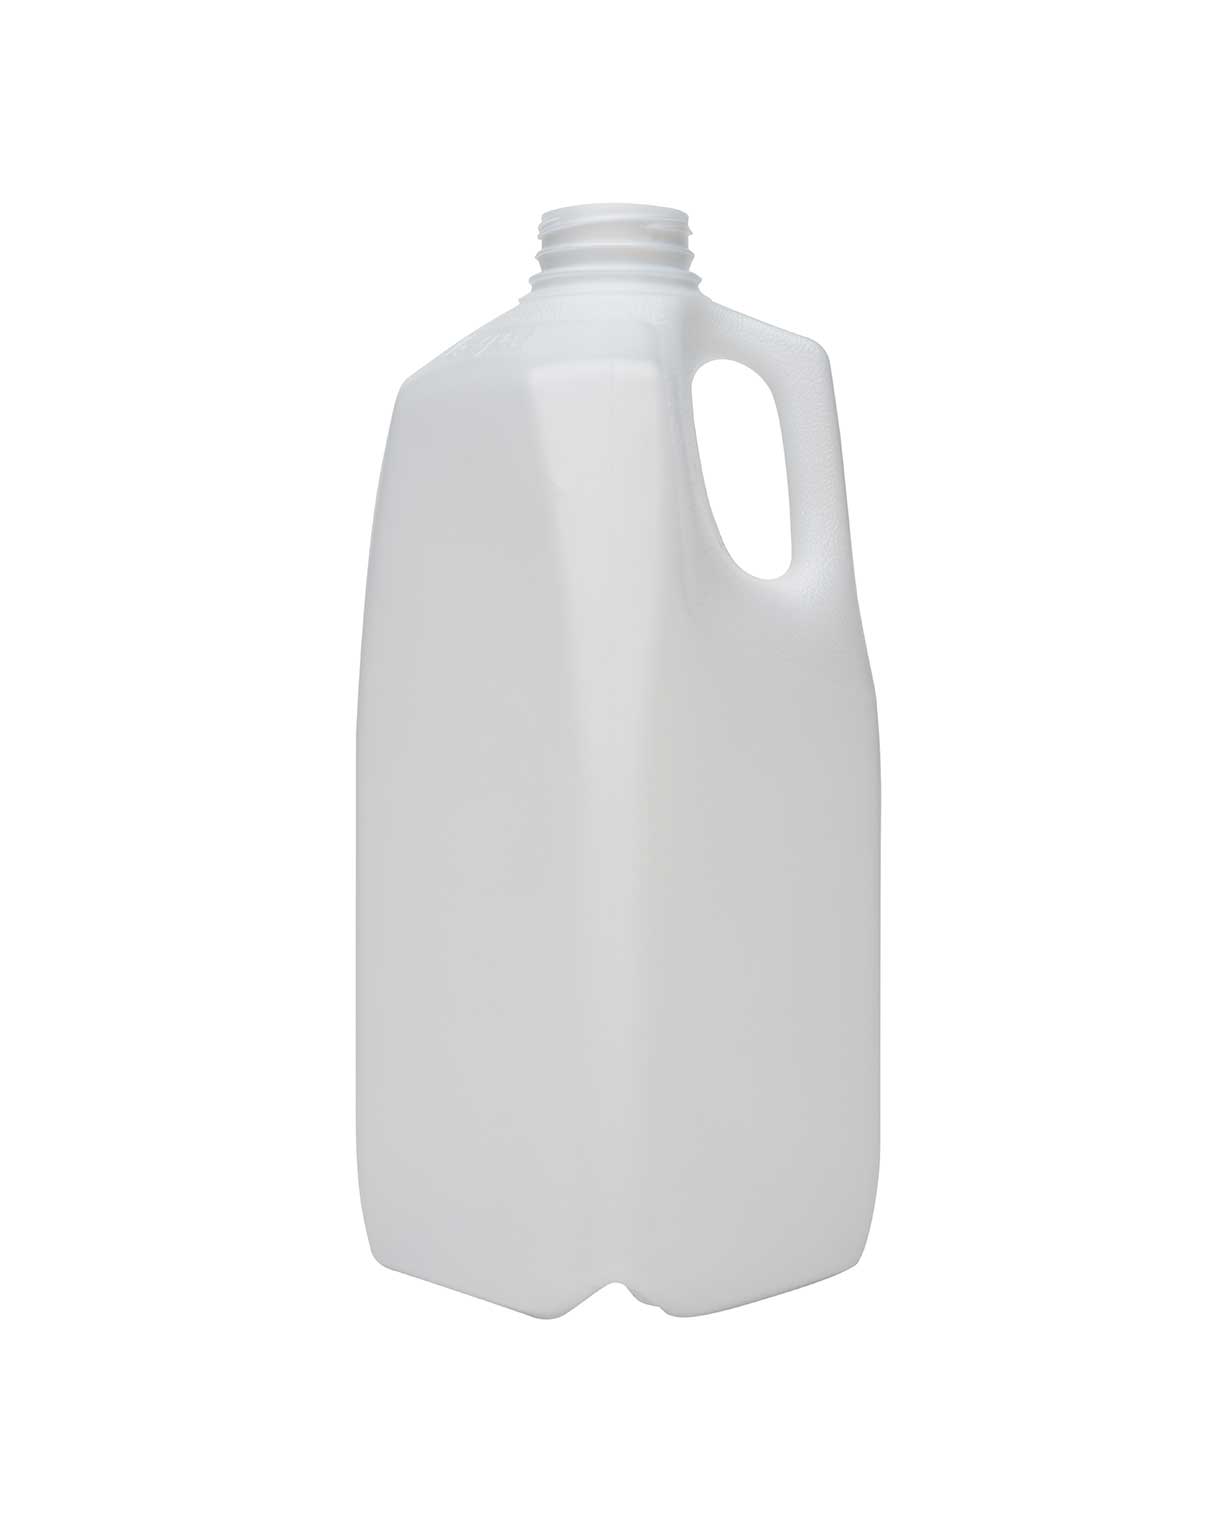 Dairy Square Bottle